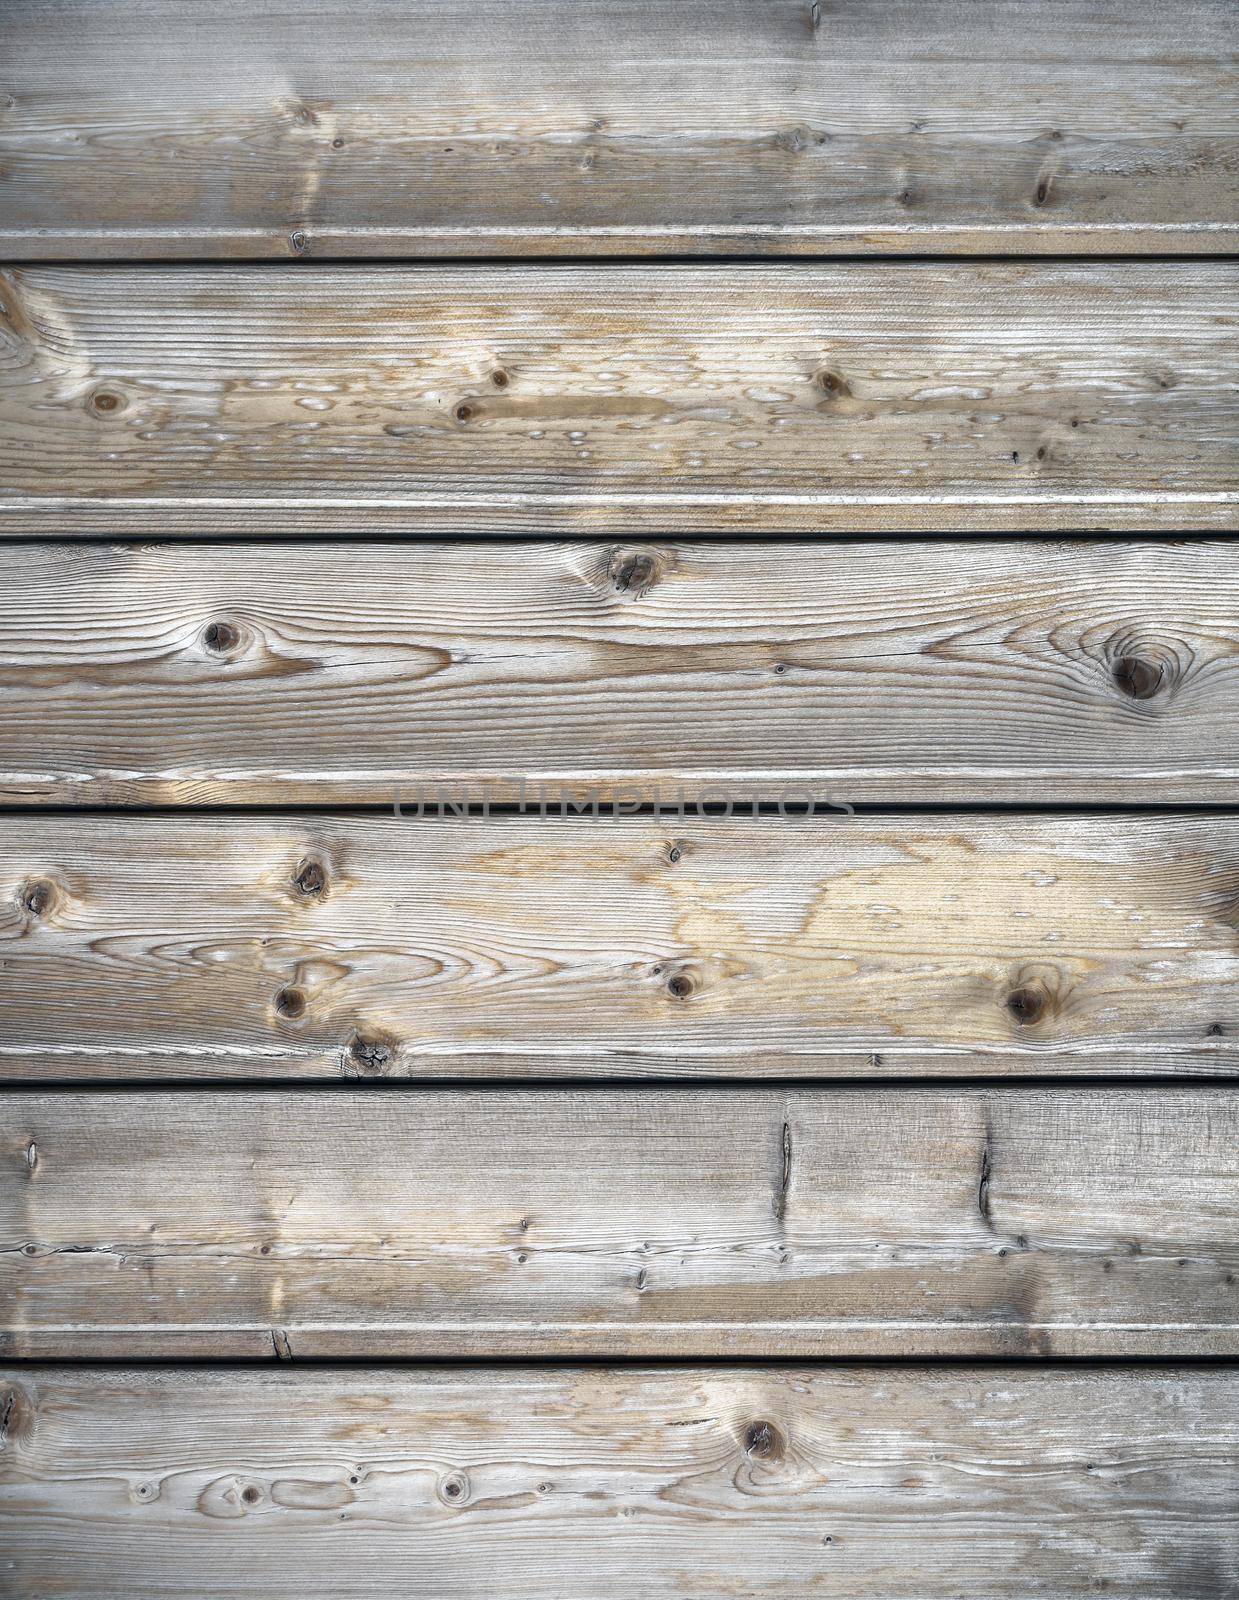 Wood plank texture background by germanopoli